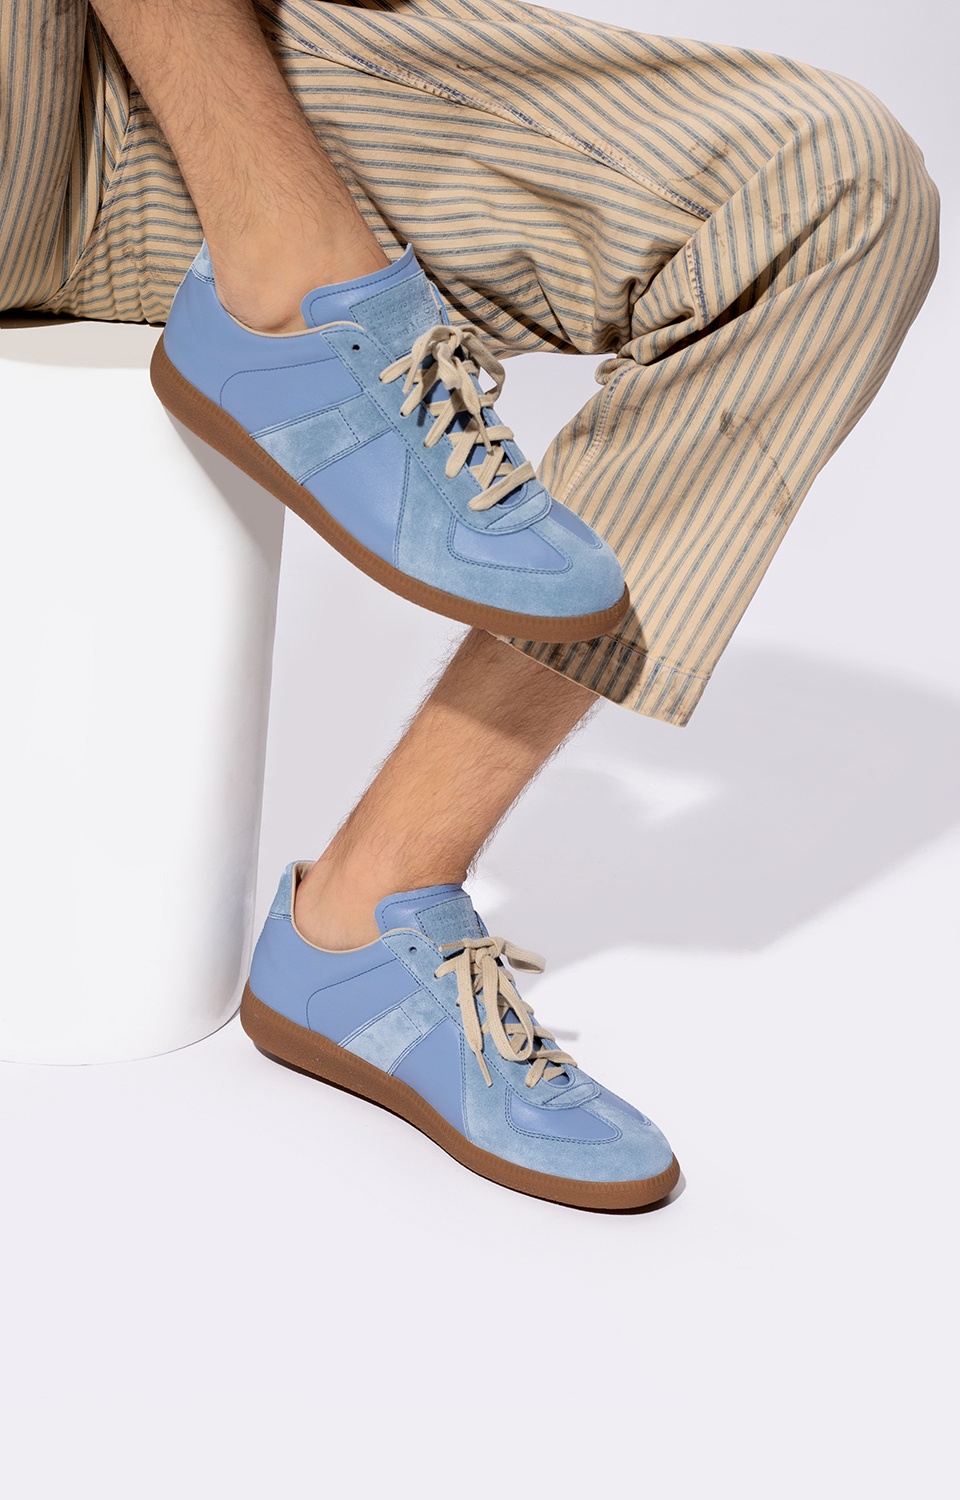 Maison Margiela ‘Replica’ sneakers with patch